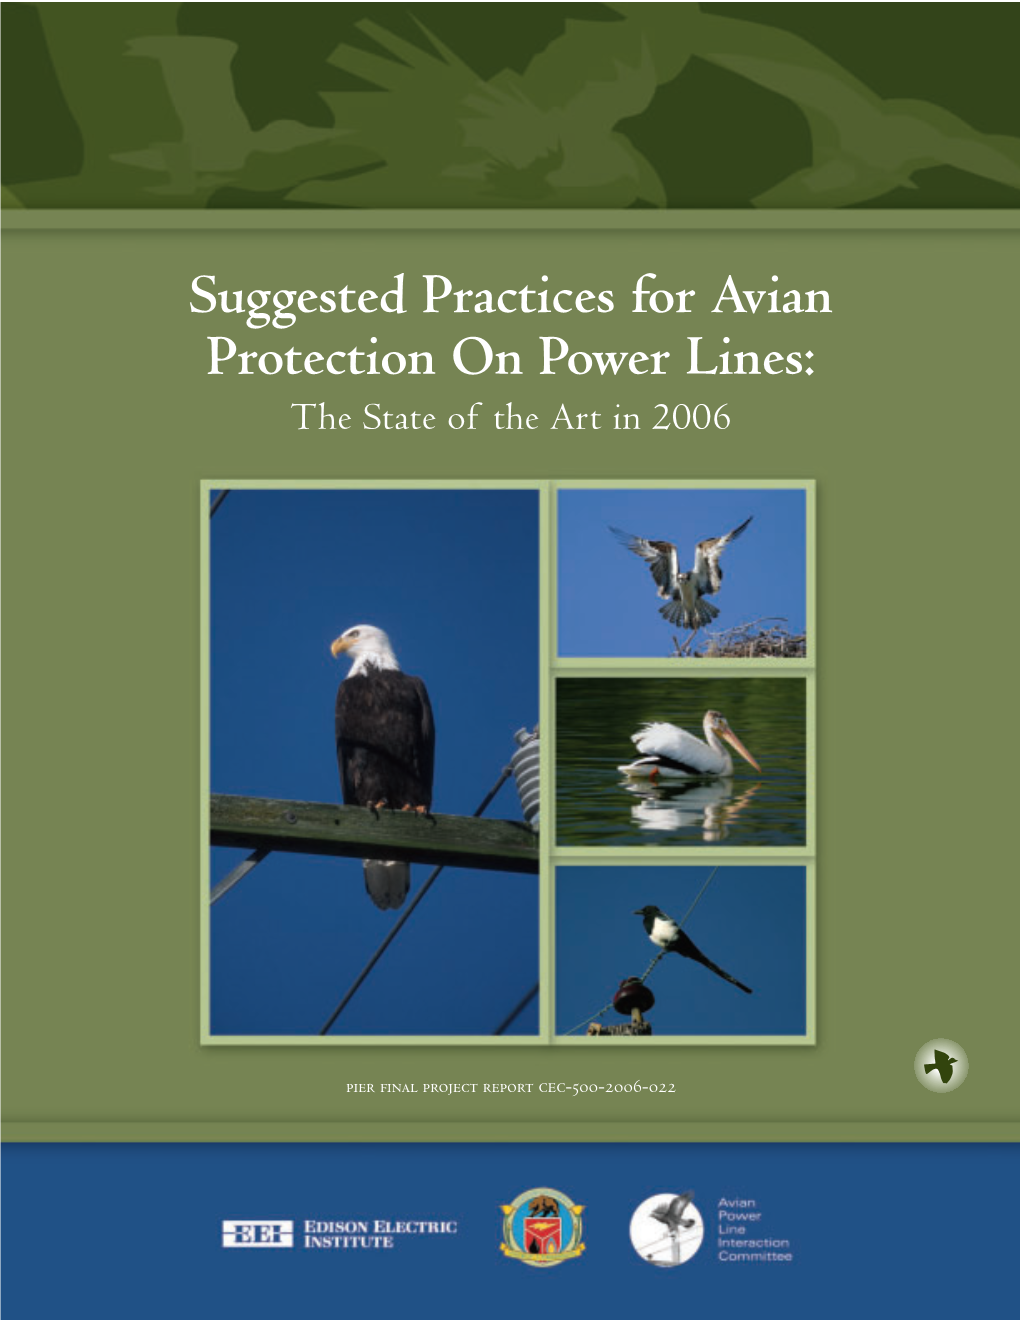 Suggested Practices for Avian Protection on Power Lines